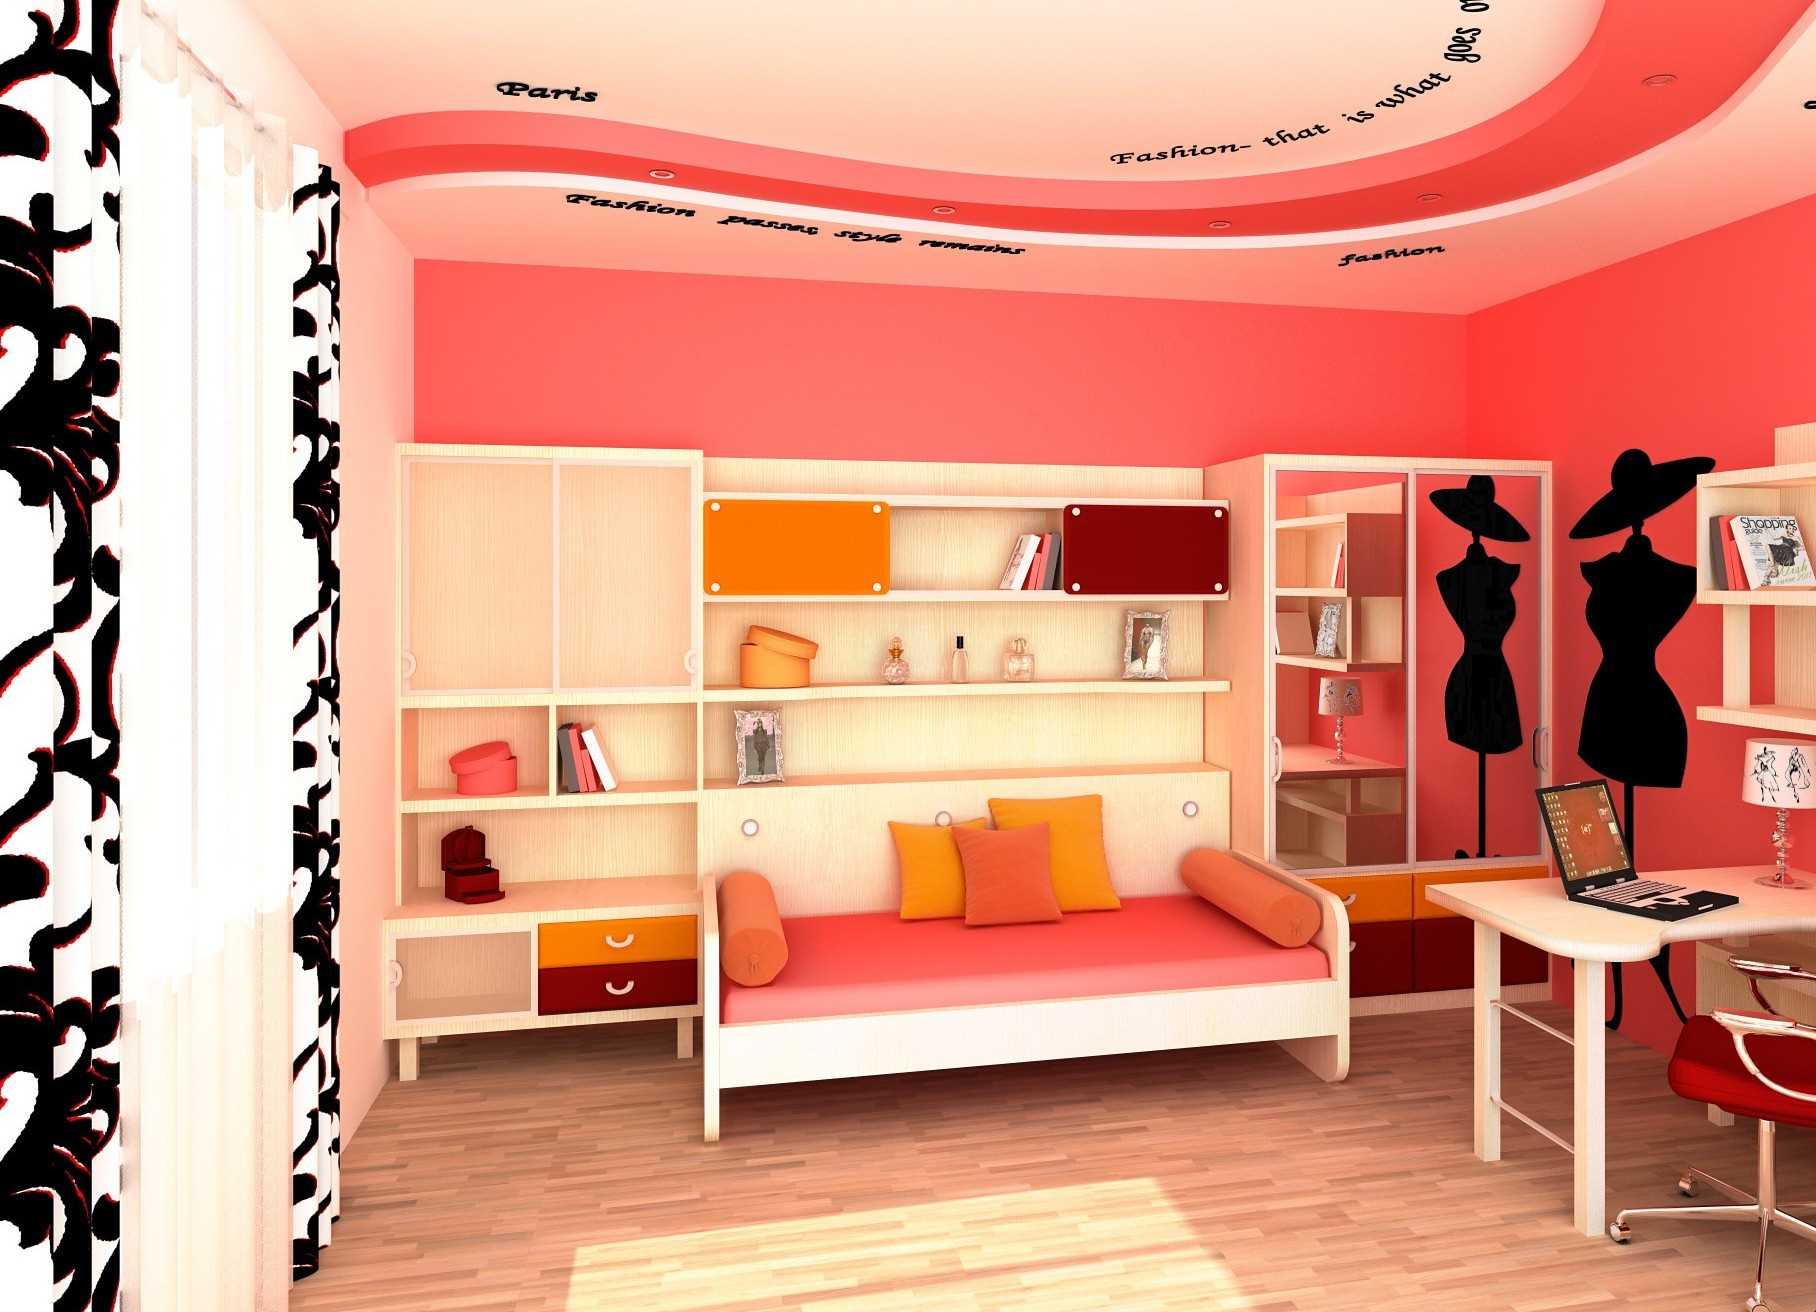 idea of ​​an original style of a bedroom for a girl